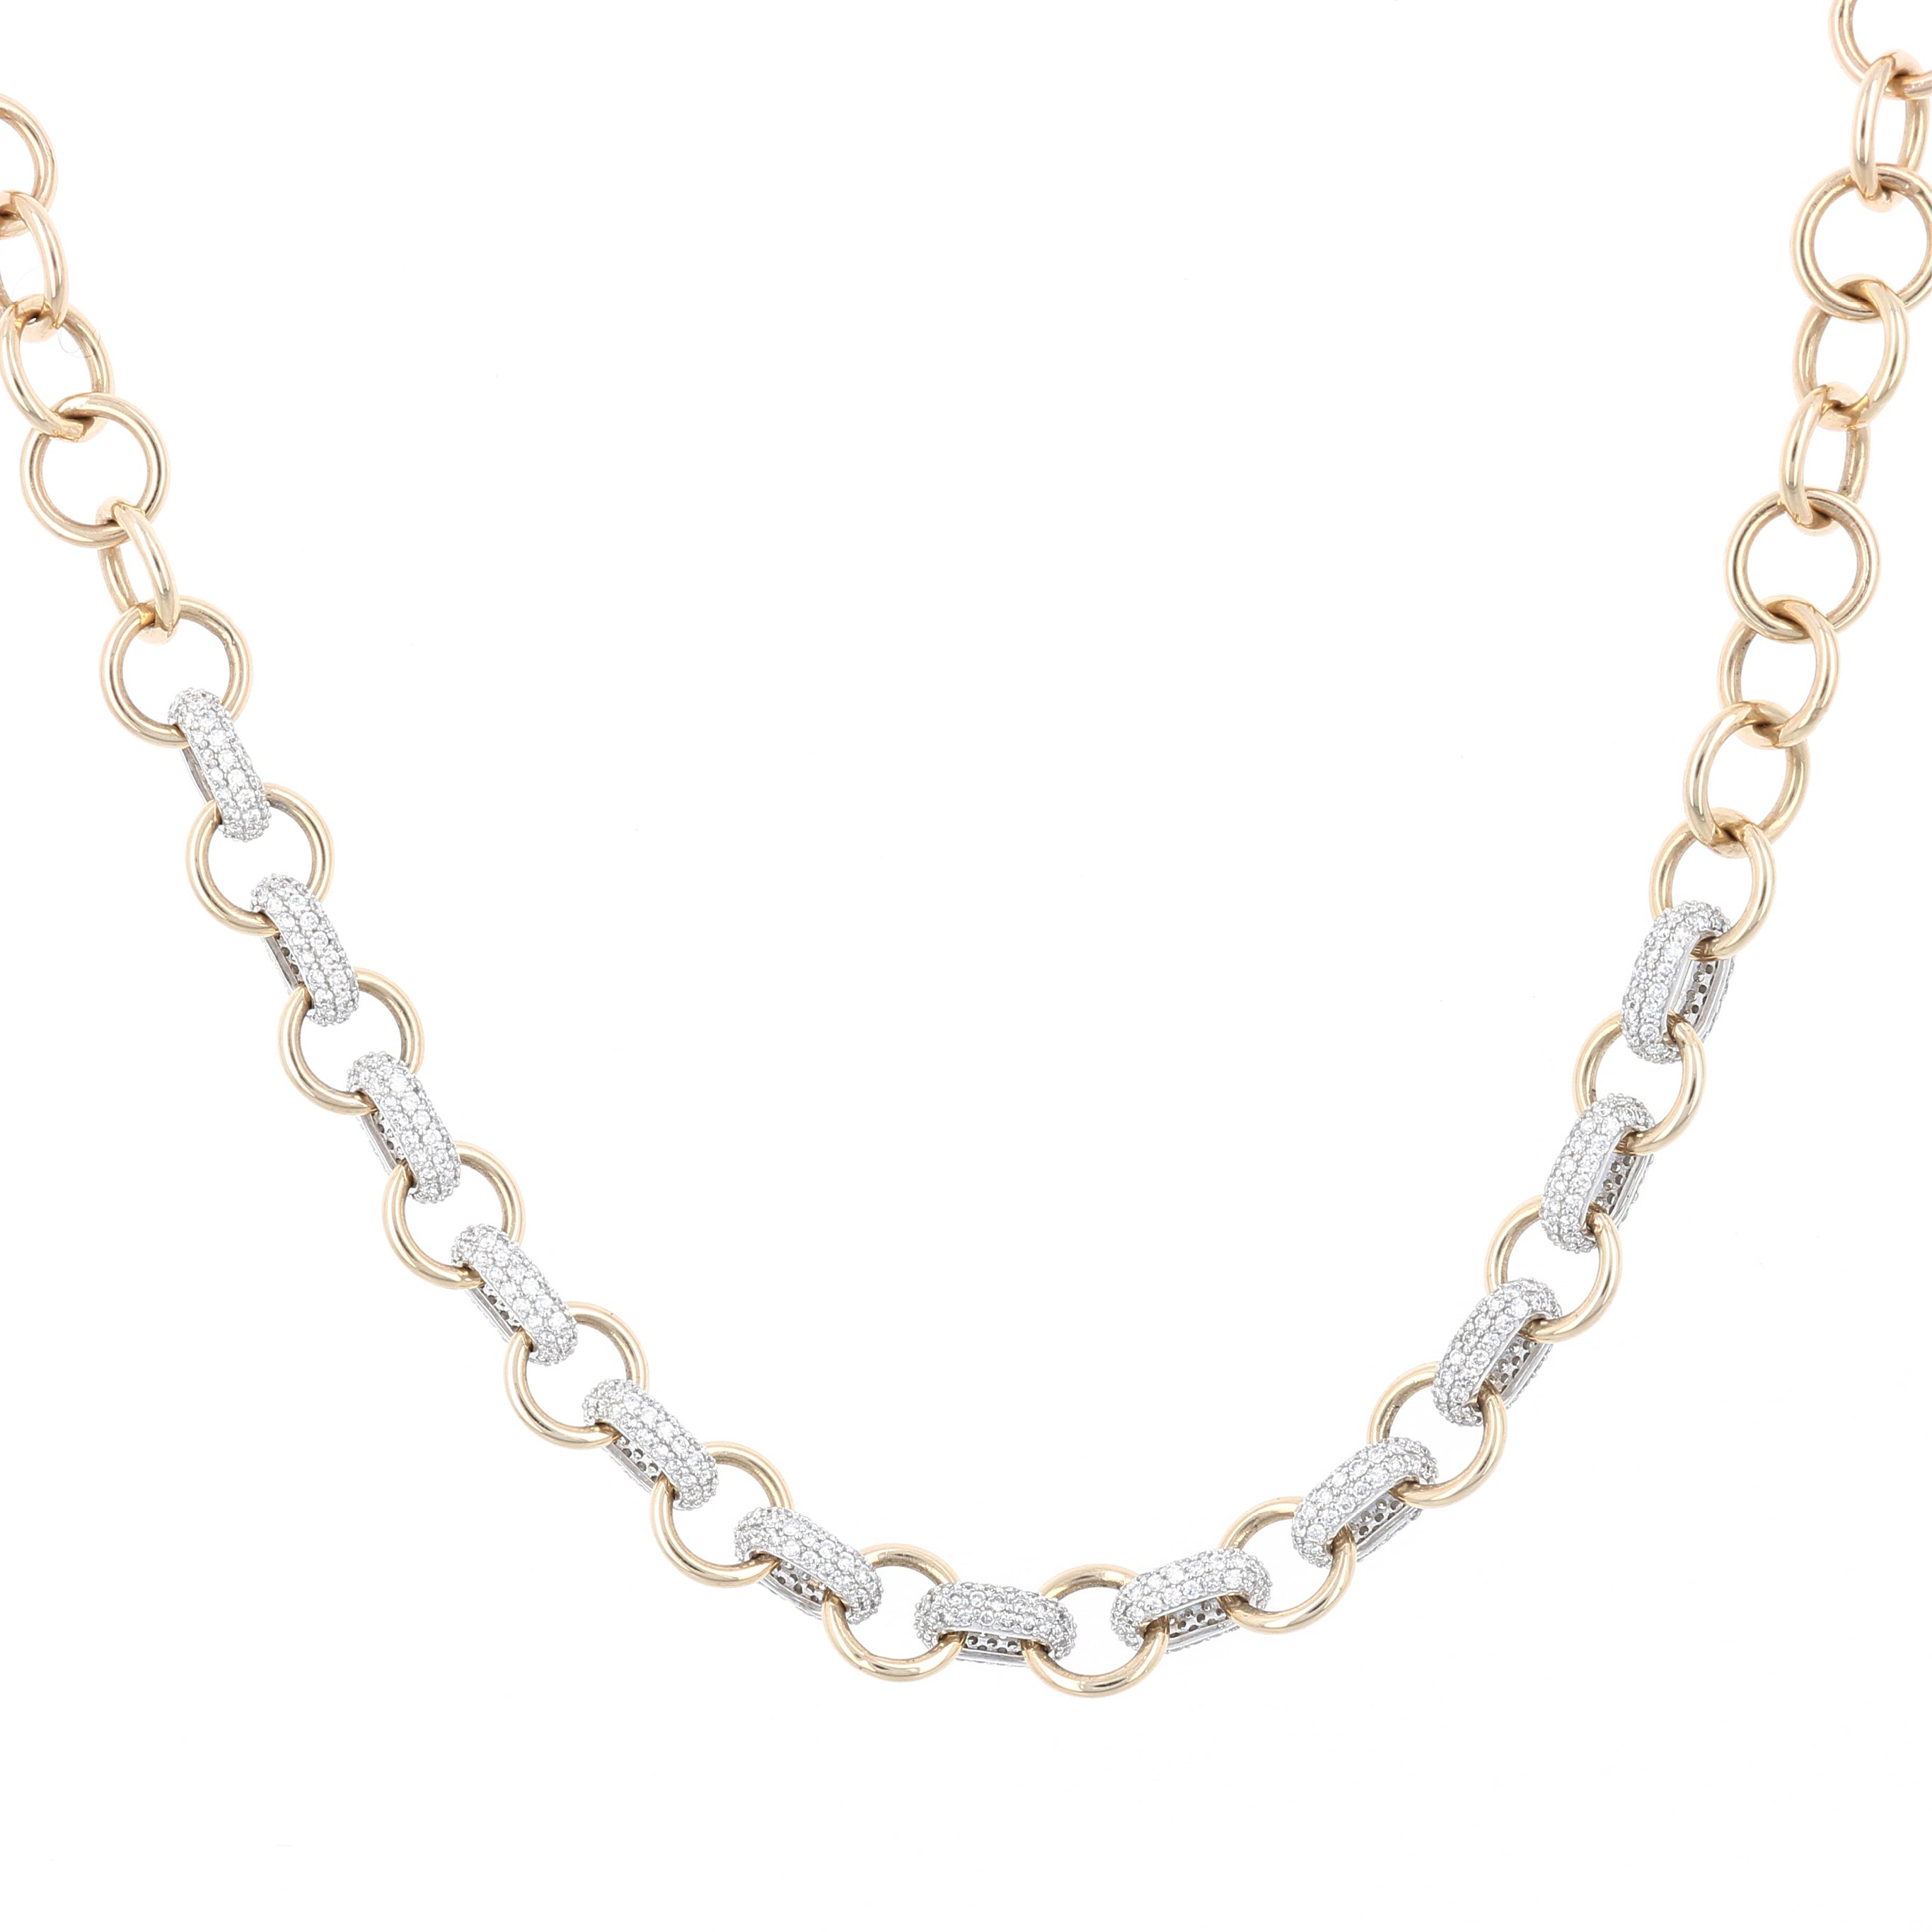 Yellow Gold and Diamond Chain Link Necklace